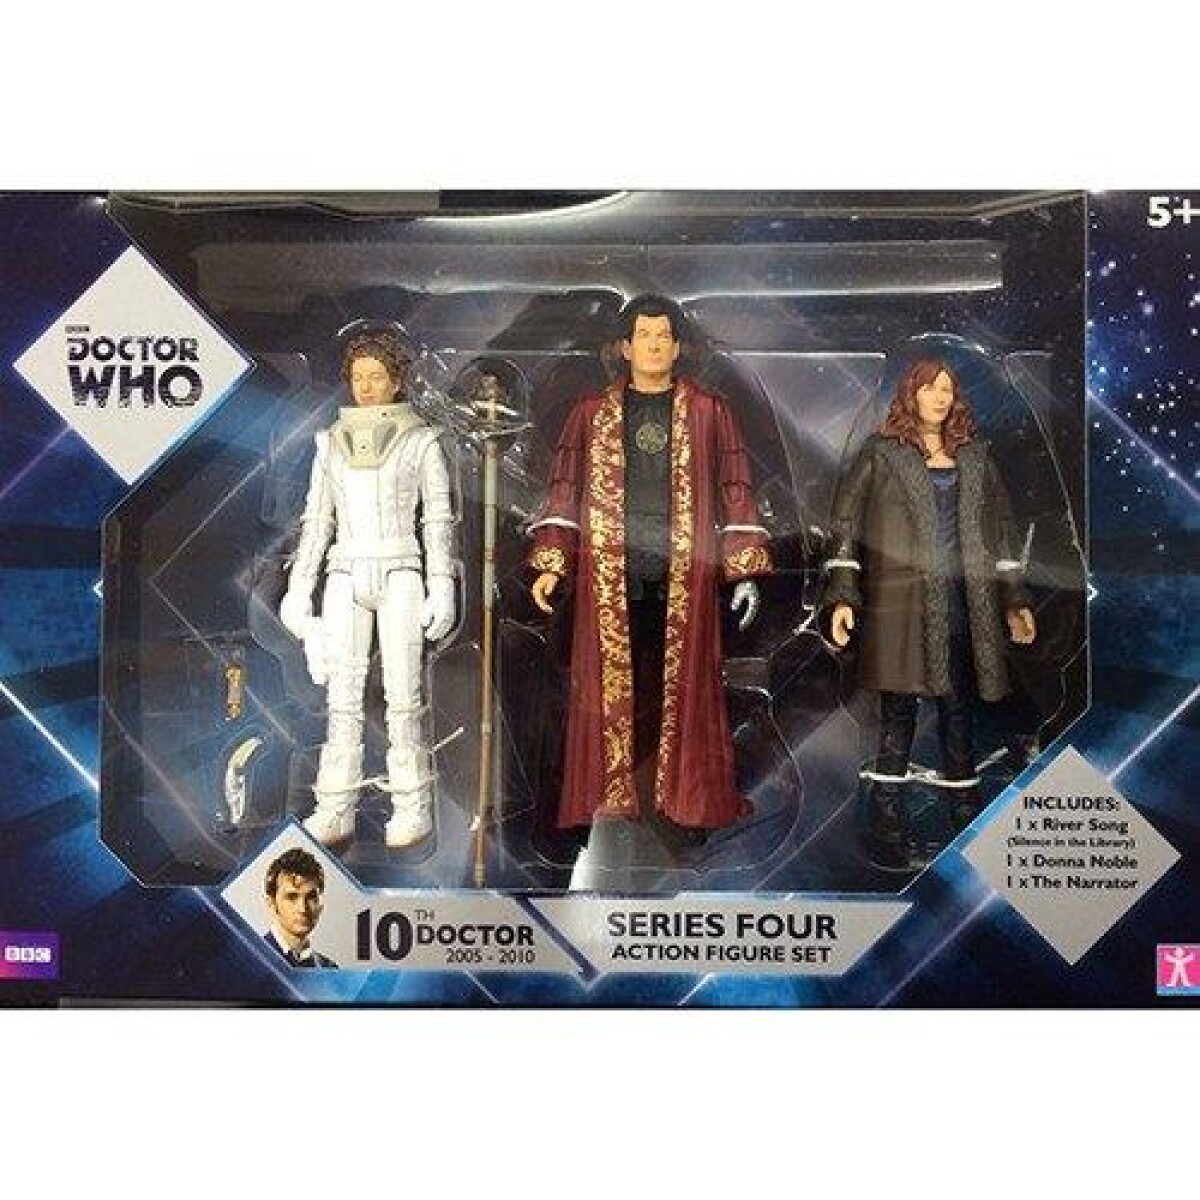 DOCTOR WHO/ SERIES FOUR ACTION FIGURE SET 